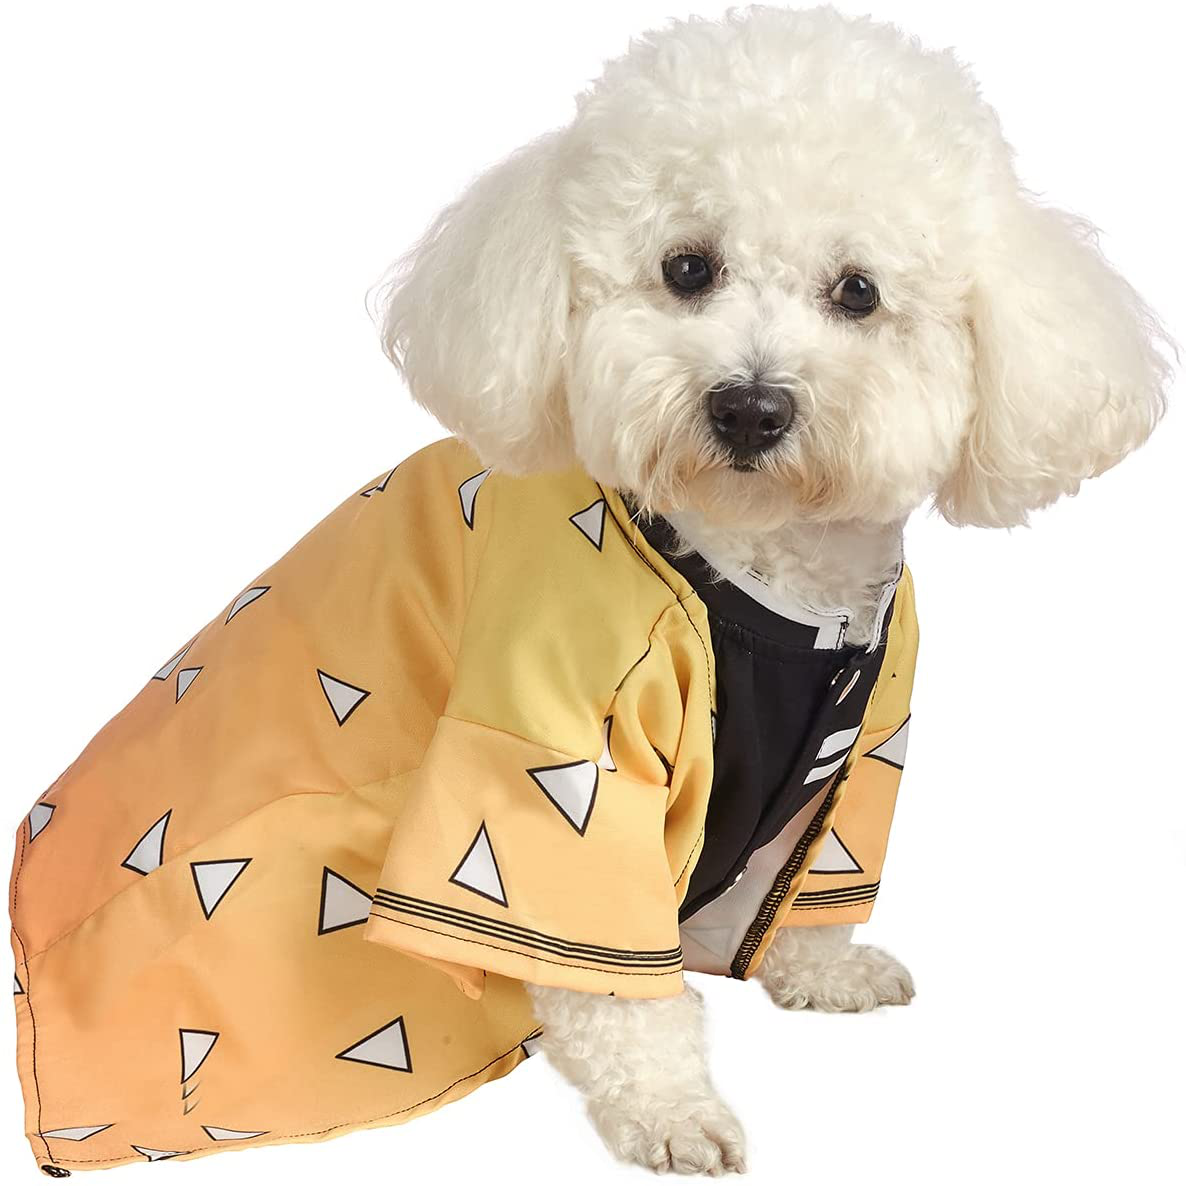 Coomour Dog Costume Pet Clothes Cat Cosplay Outfits Funny Small Dog Costumes